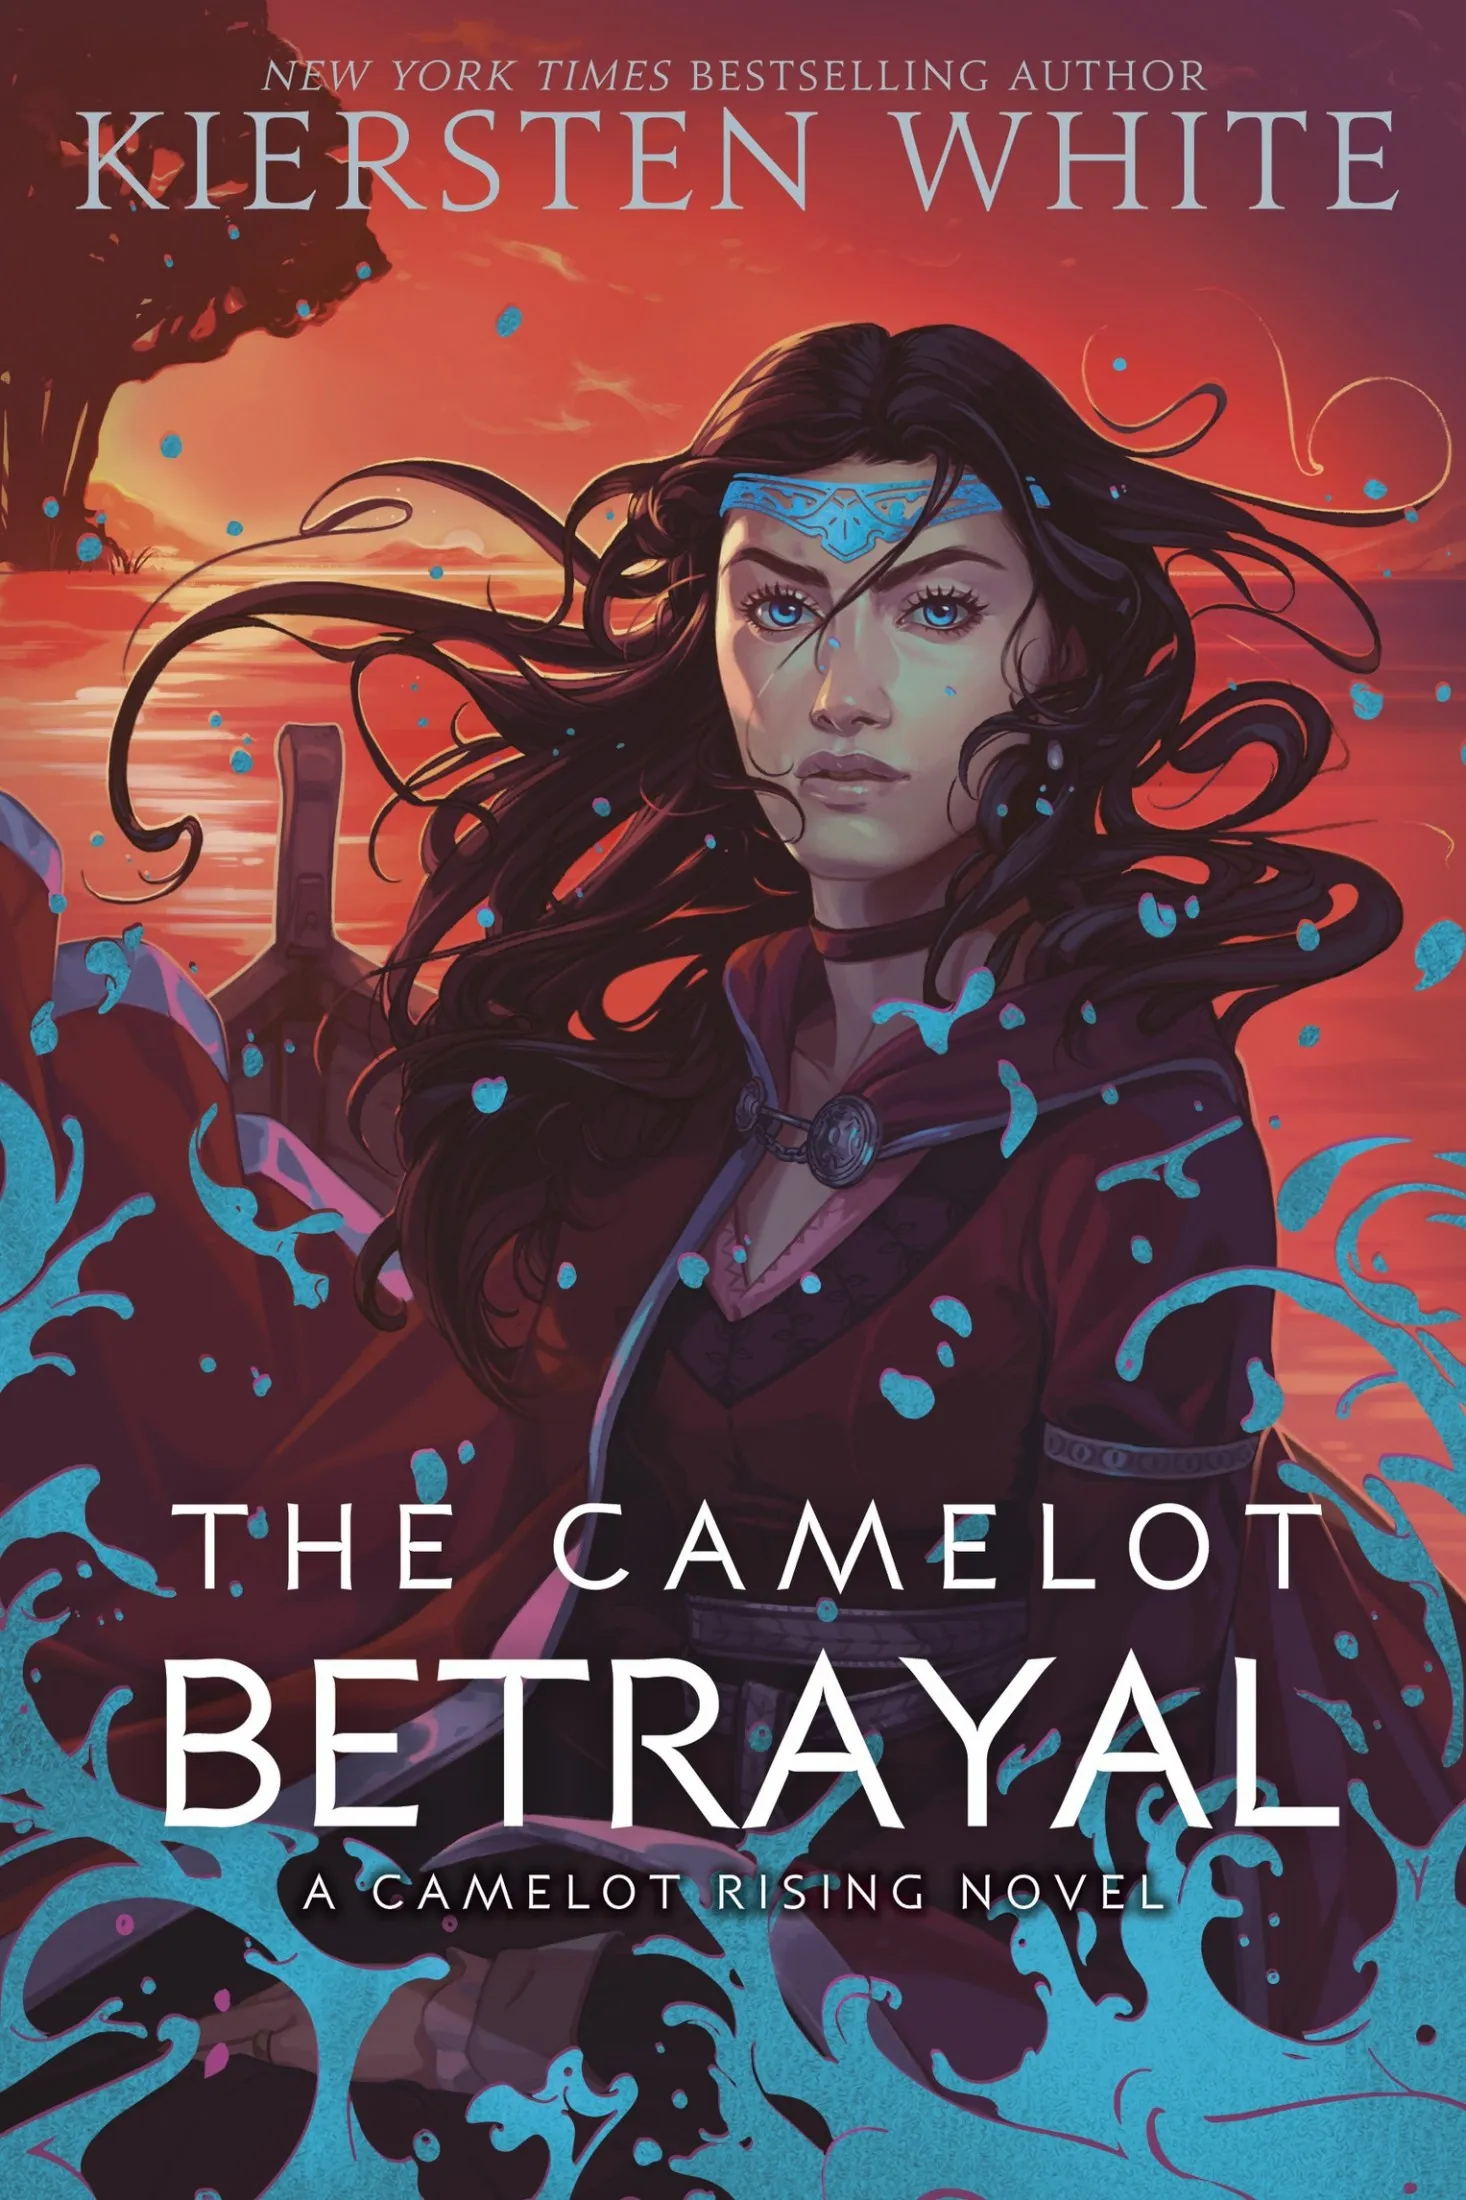 The Camelot Betrayal (Camelot Rising Trilogy #2)